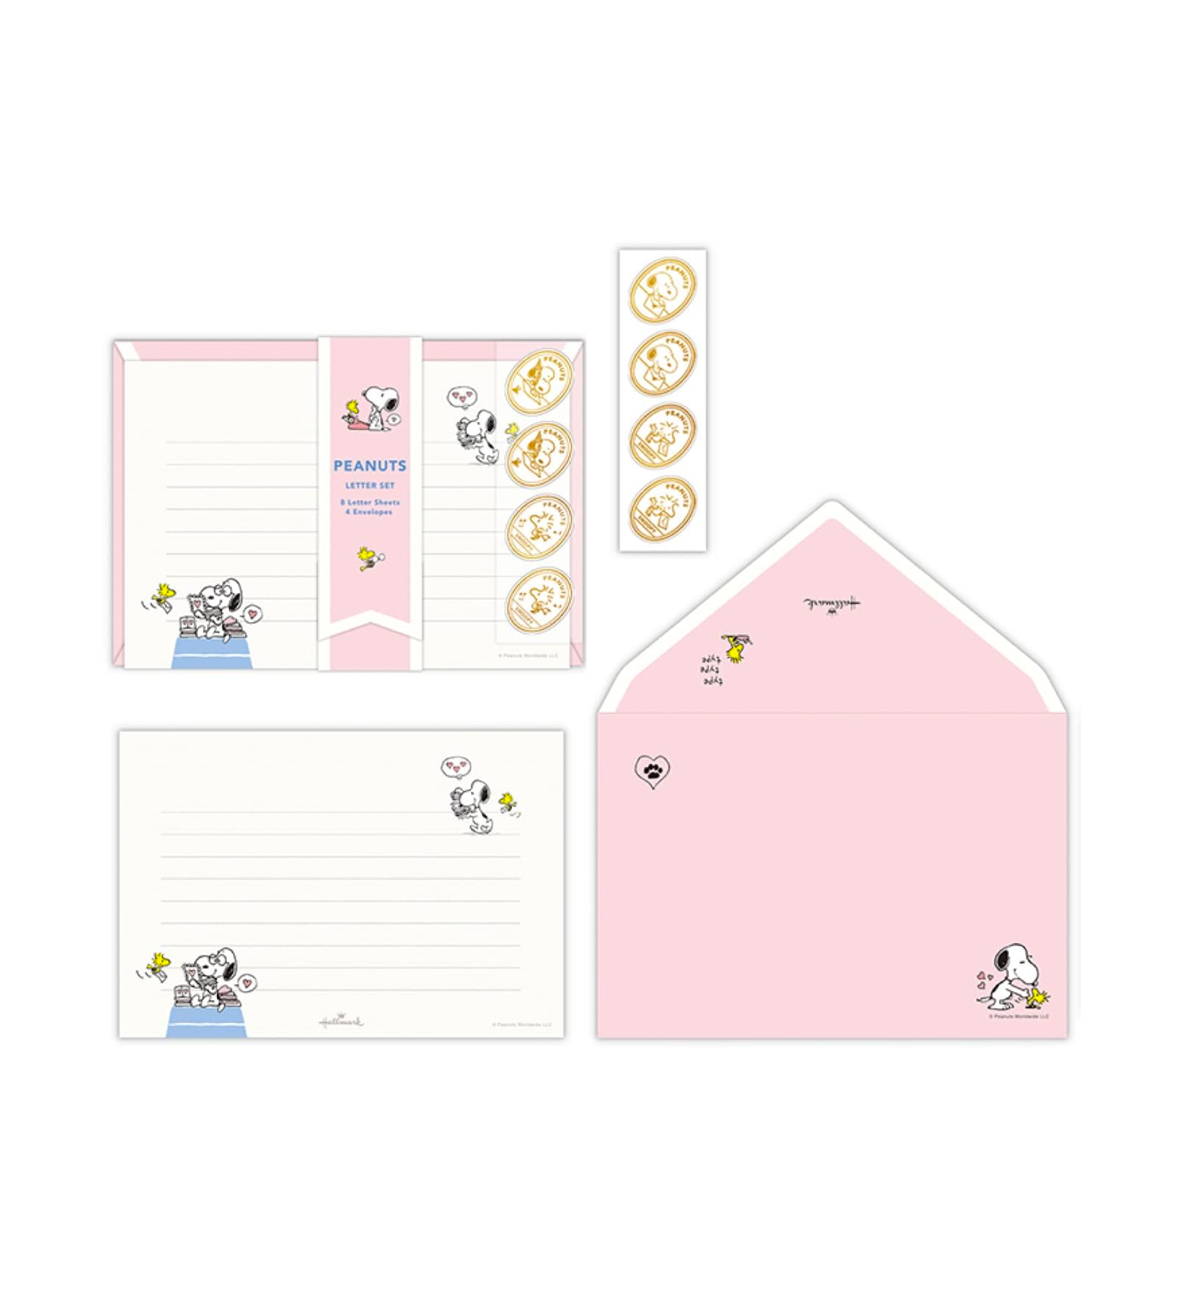 Peanuts Snoopy Be Yourself Letter Set [Pink]